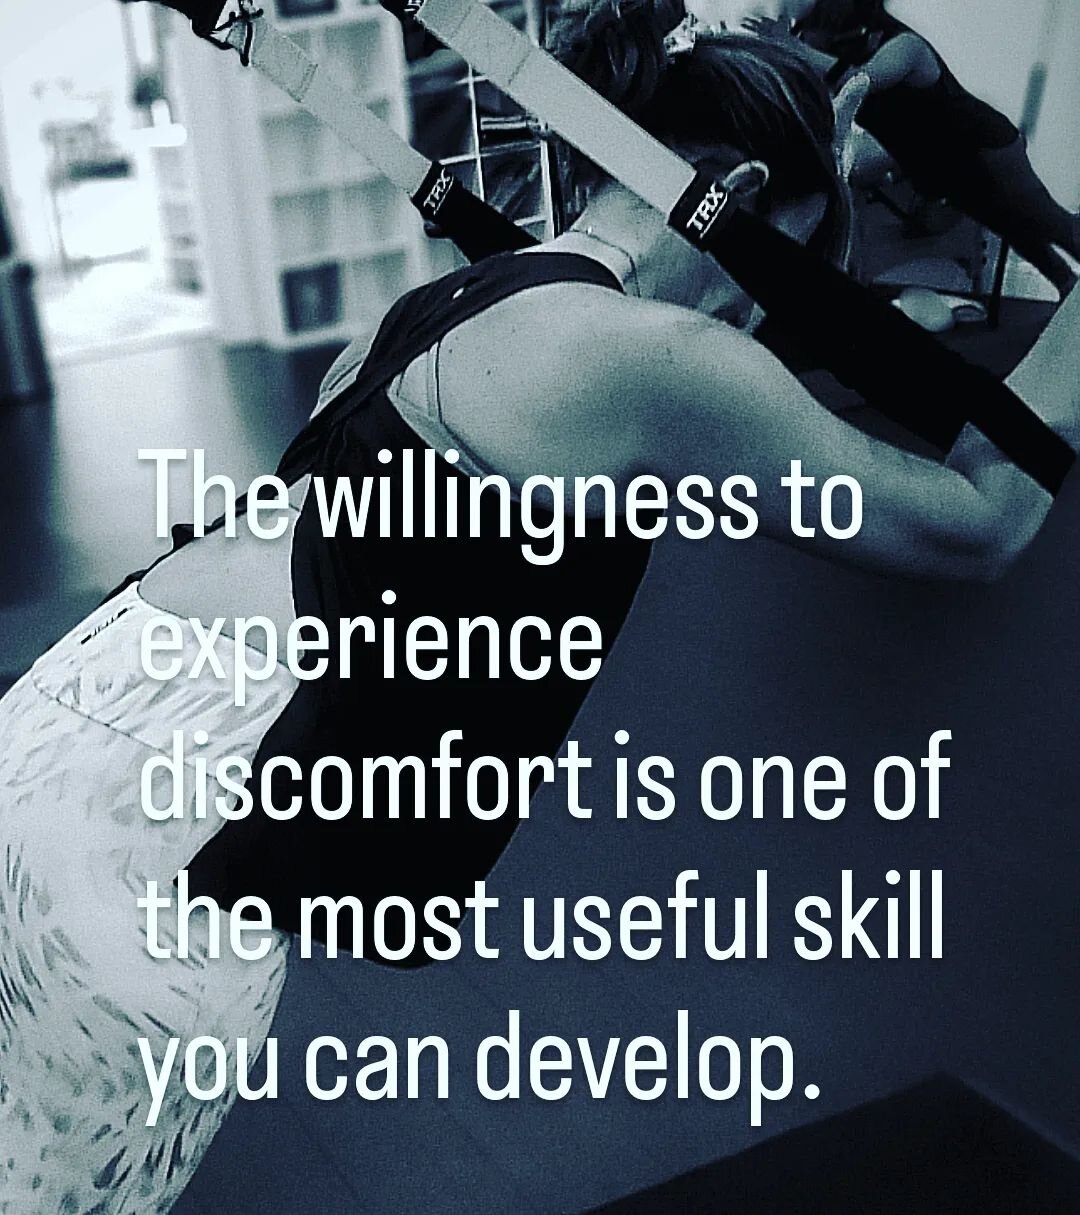 The more willing you are to experience discomfort, the more opportunities you will have and the better your quality of life will be.

#strength #mindset #goalsetting #plank #trx #fountainvalley #huntingtonbeach #orangecounty #personaltraining #coretr